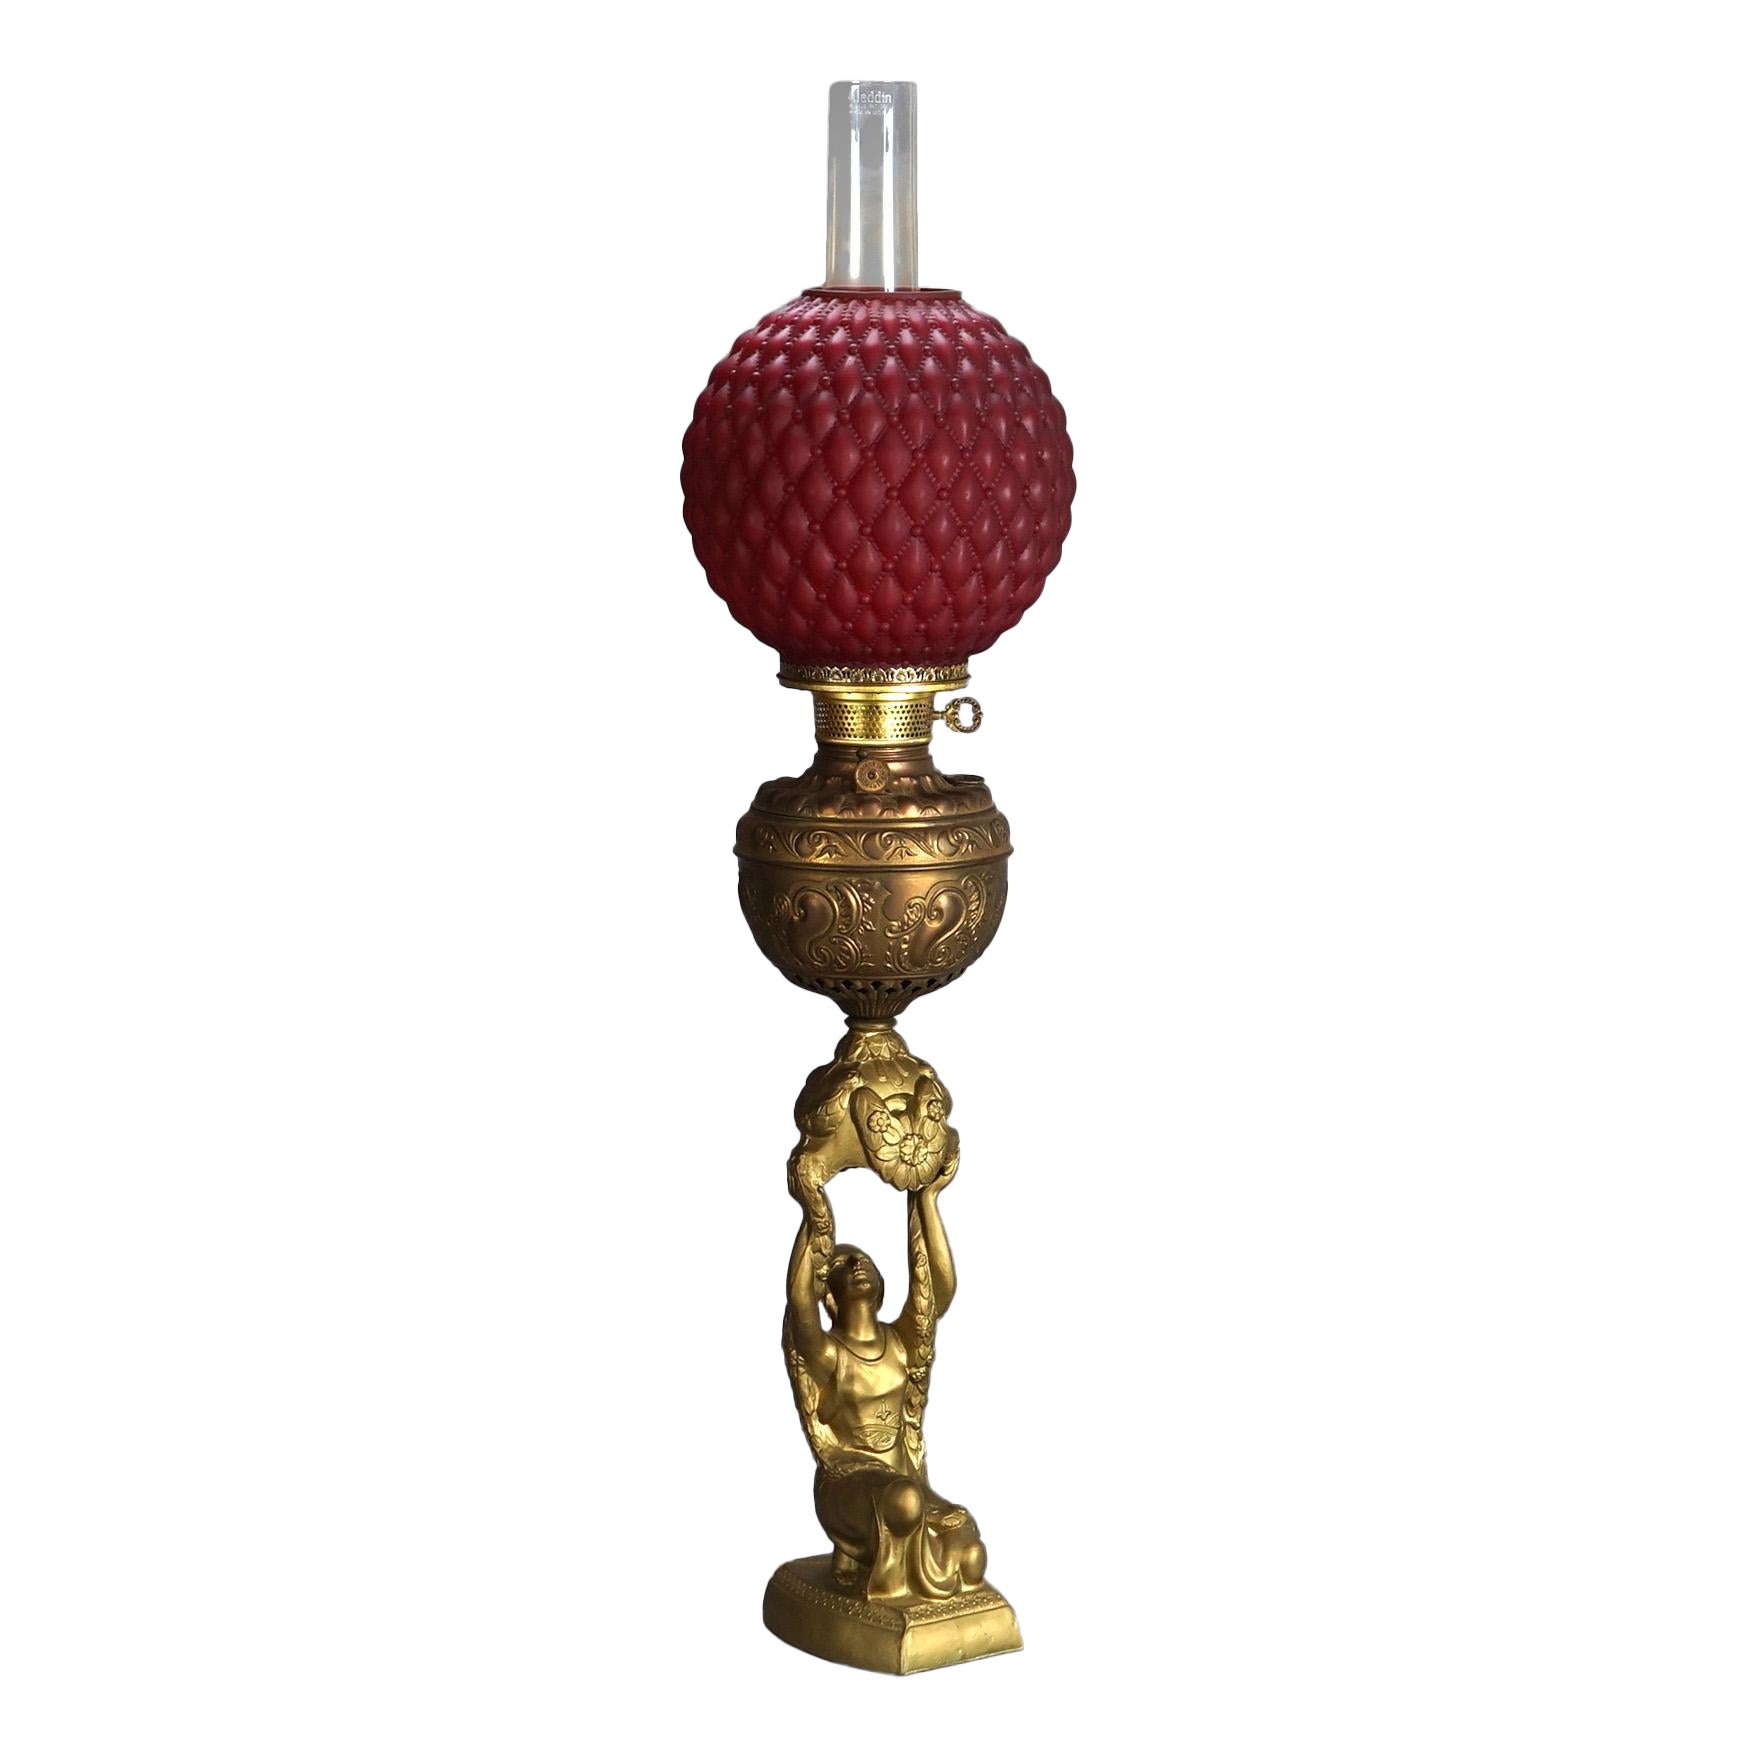 Antique Figural Gilt Metal Parlor Lamp with Quilted Red Glass Shade Circa 1900 For Sale